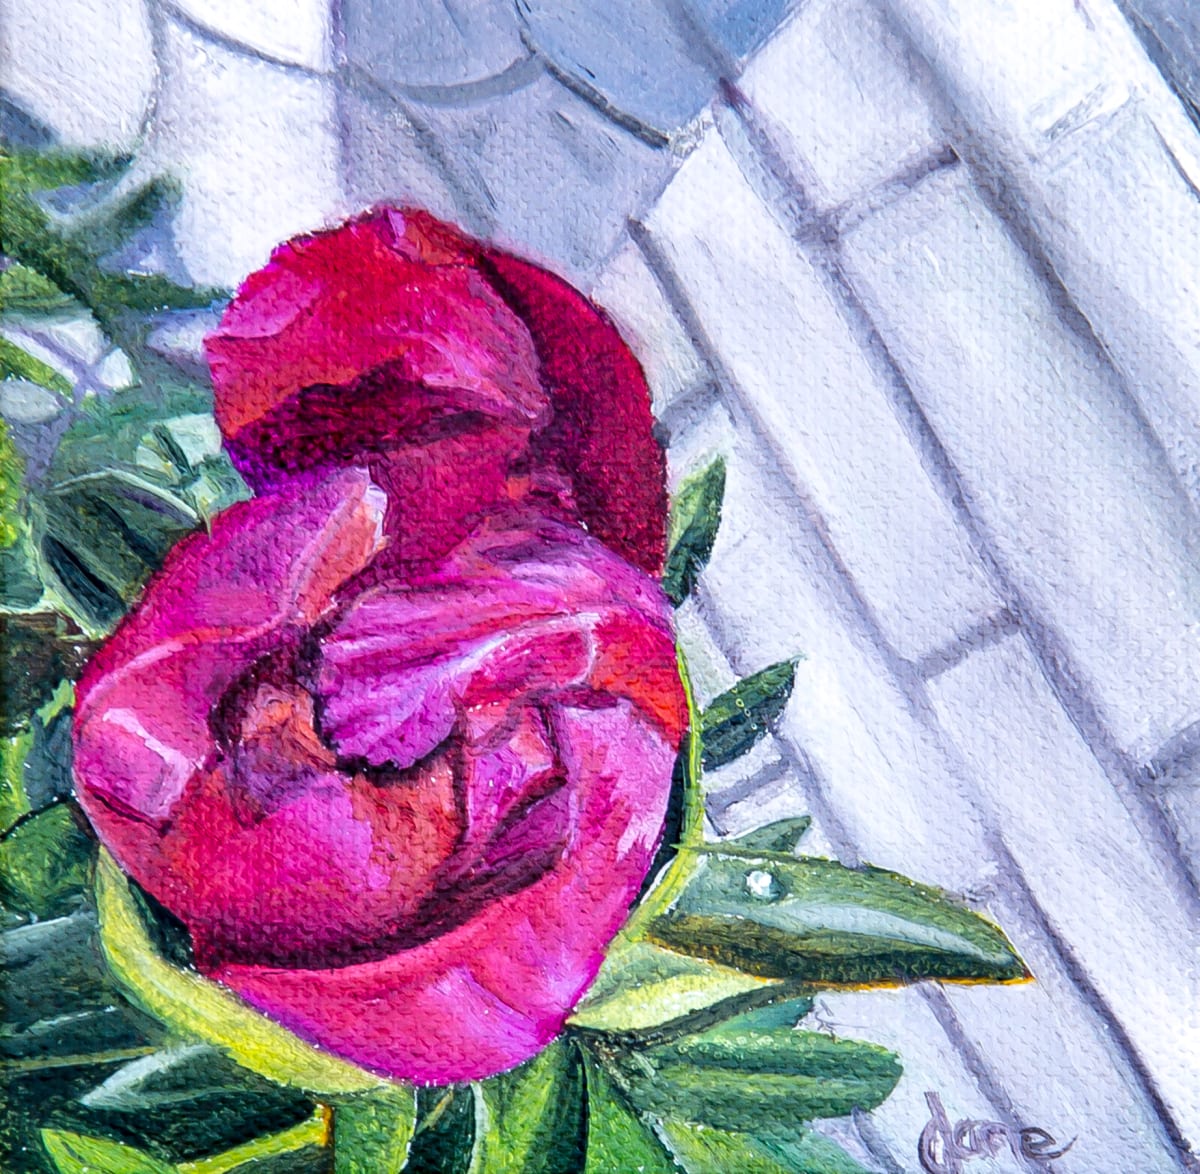 June Peony by Nila Jane Autry  Image: And she opens! A vividly colored flower pops against a contrasting background of cool grey tones. The petals display a dynamic range of purples and reds, with lush green foliage nestled beneath.